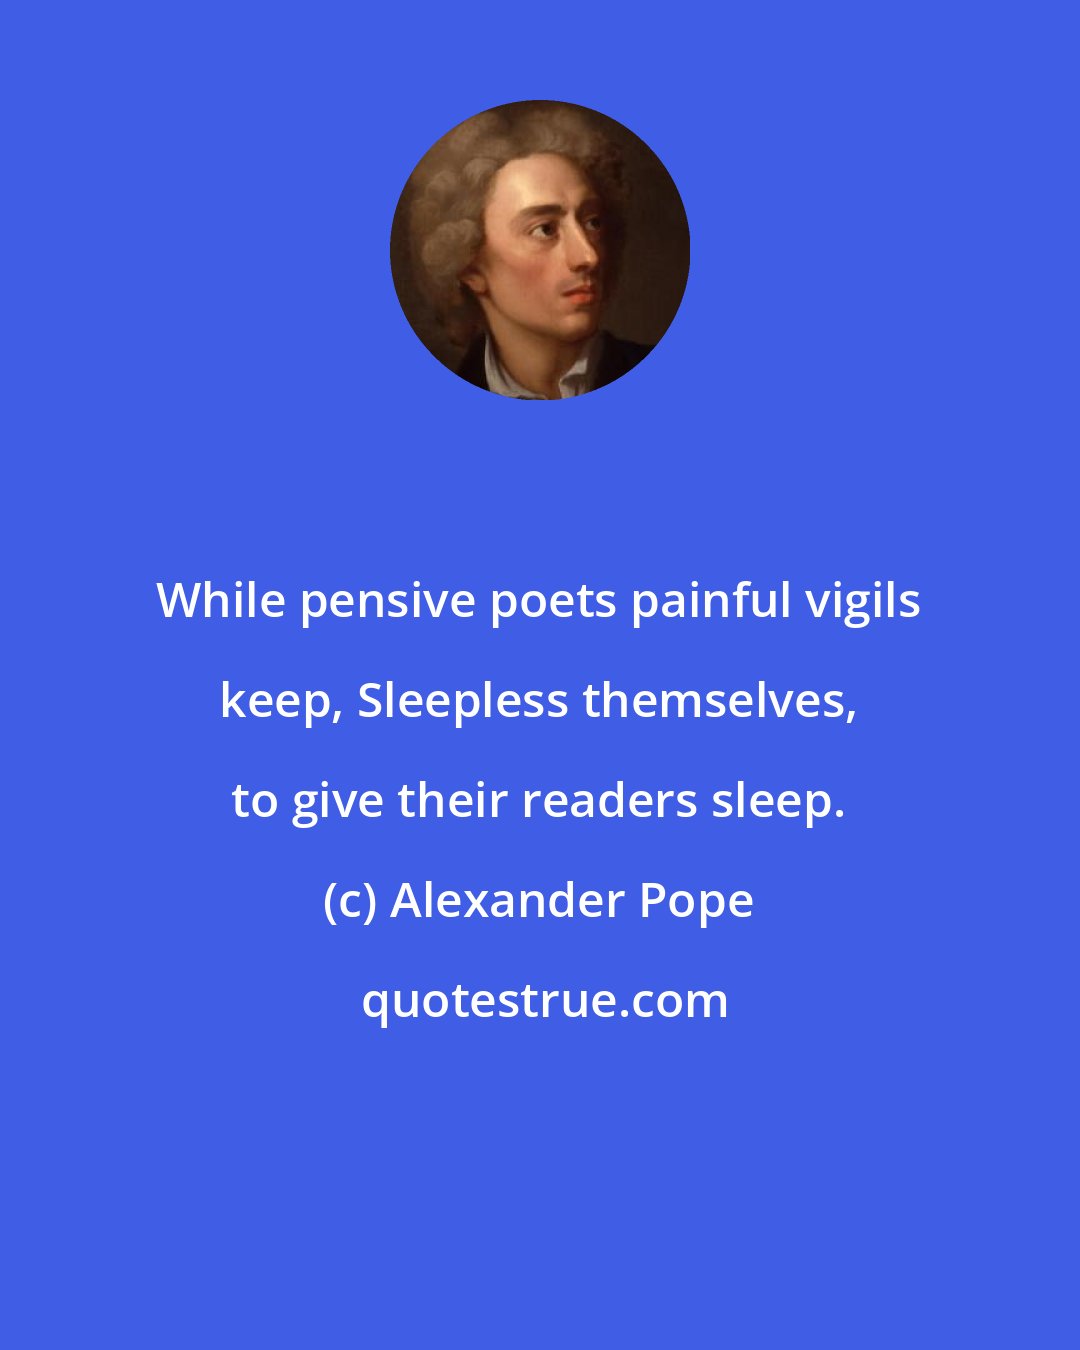 Alexander Pope: While pensive poets painful vigils keep, Sleepless themselves, to give their readers sleep.